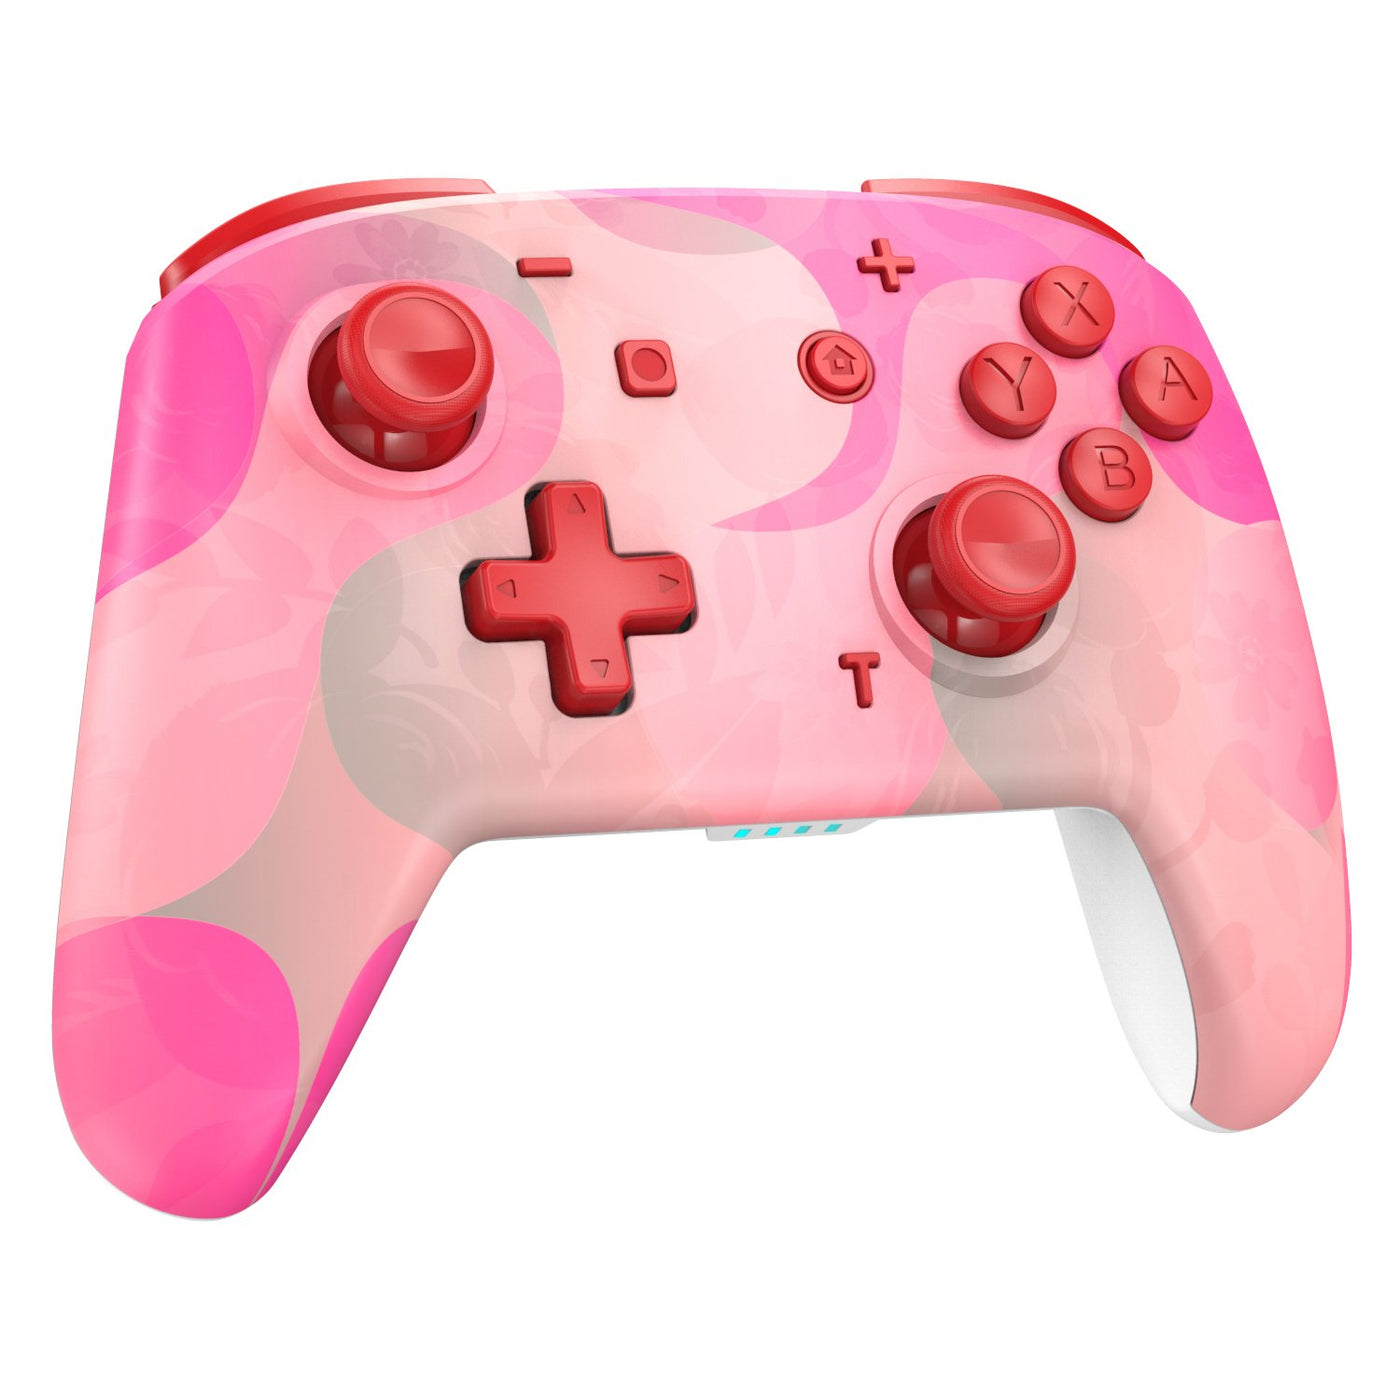 LANGTU Store EasySMX Switch Wireless Pro Controller/Remote/Gamepad for Switch/Switch Lite with Joysticks, Turbo, Motion Control, Dual Vibration, Wakeup and Screenshot Functions ft. Pink Art